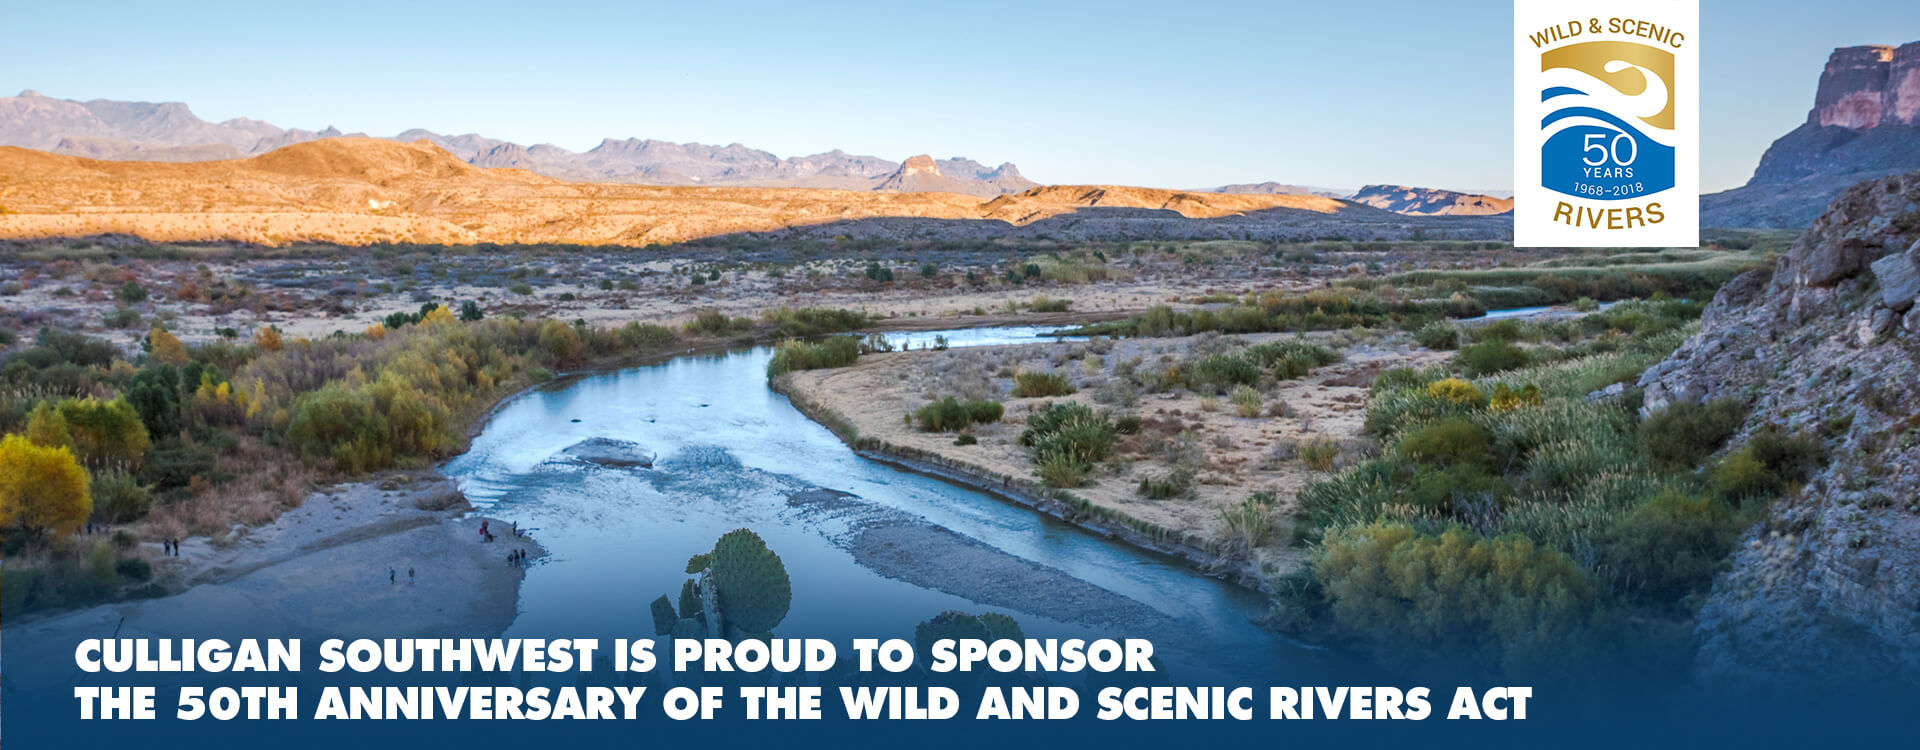 We support the Wild Scene and Scenic Rivers Act